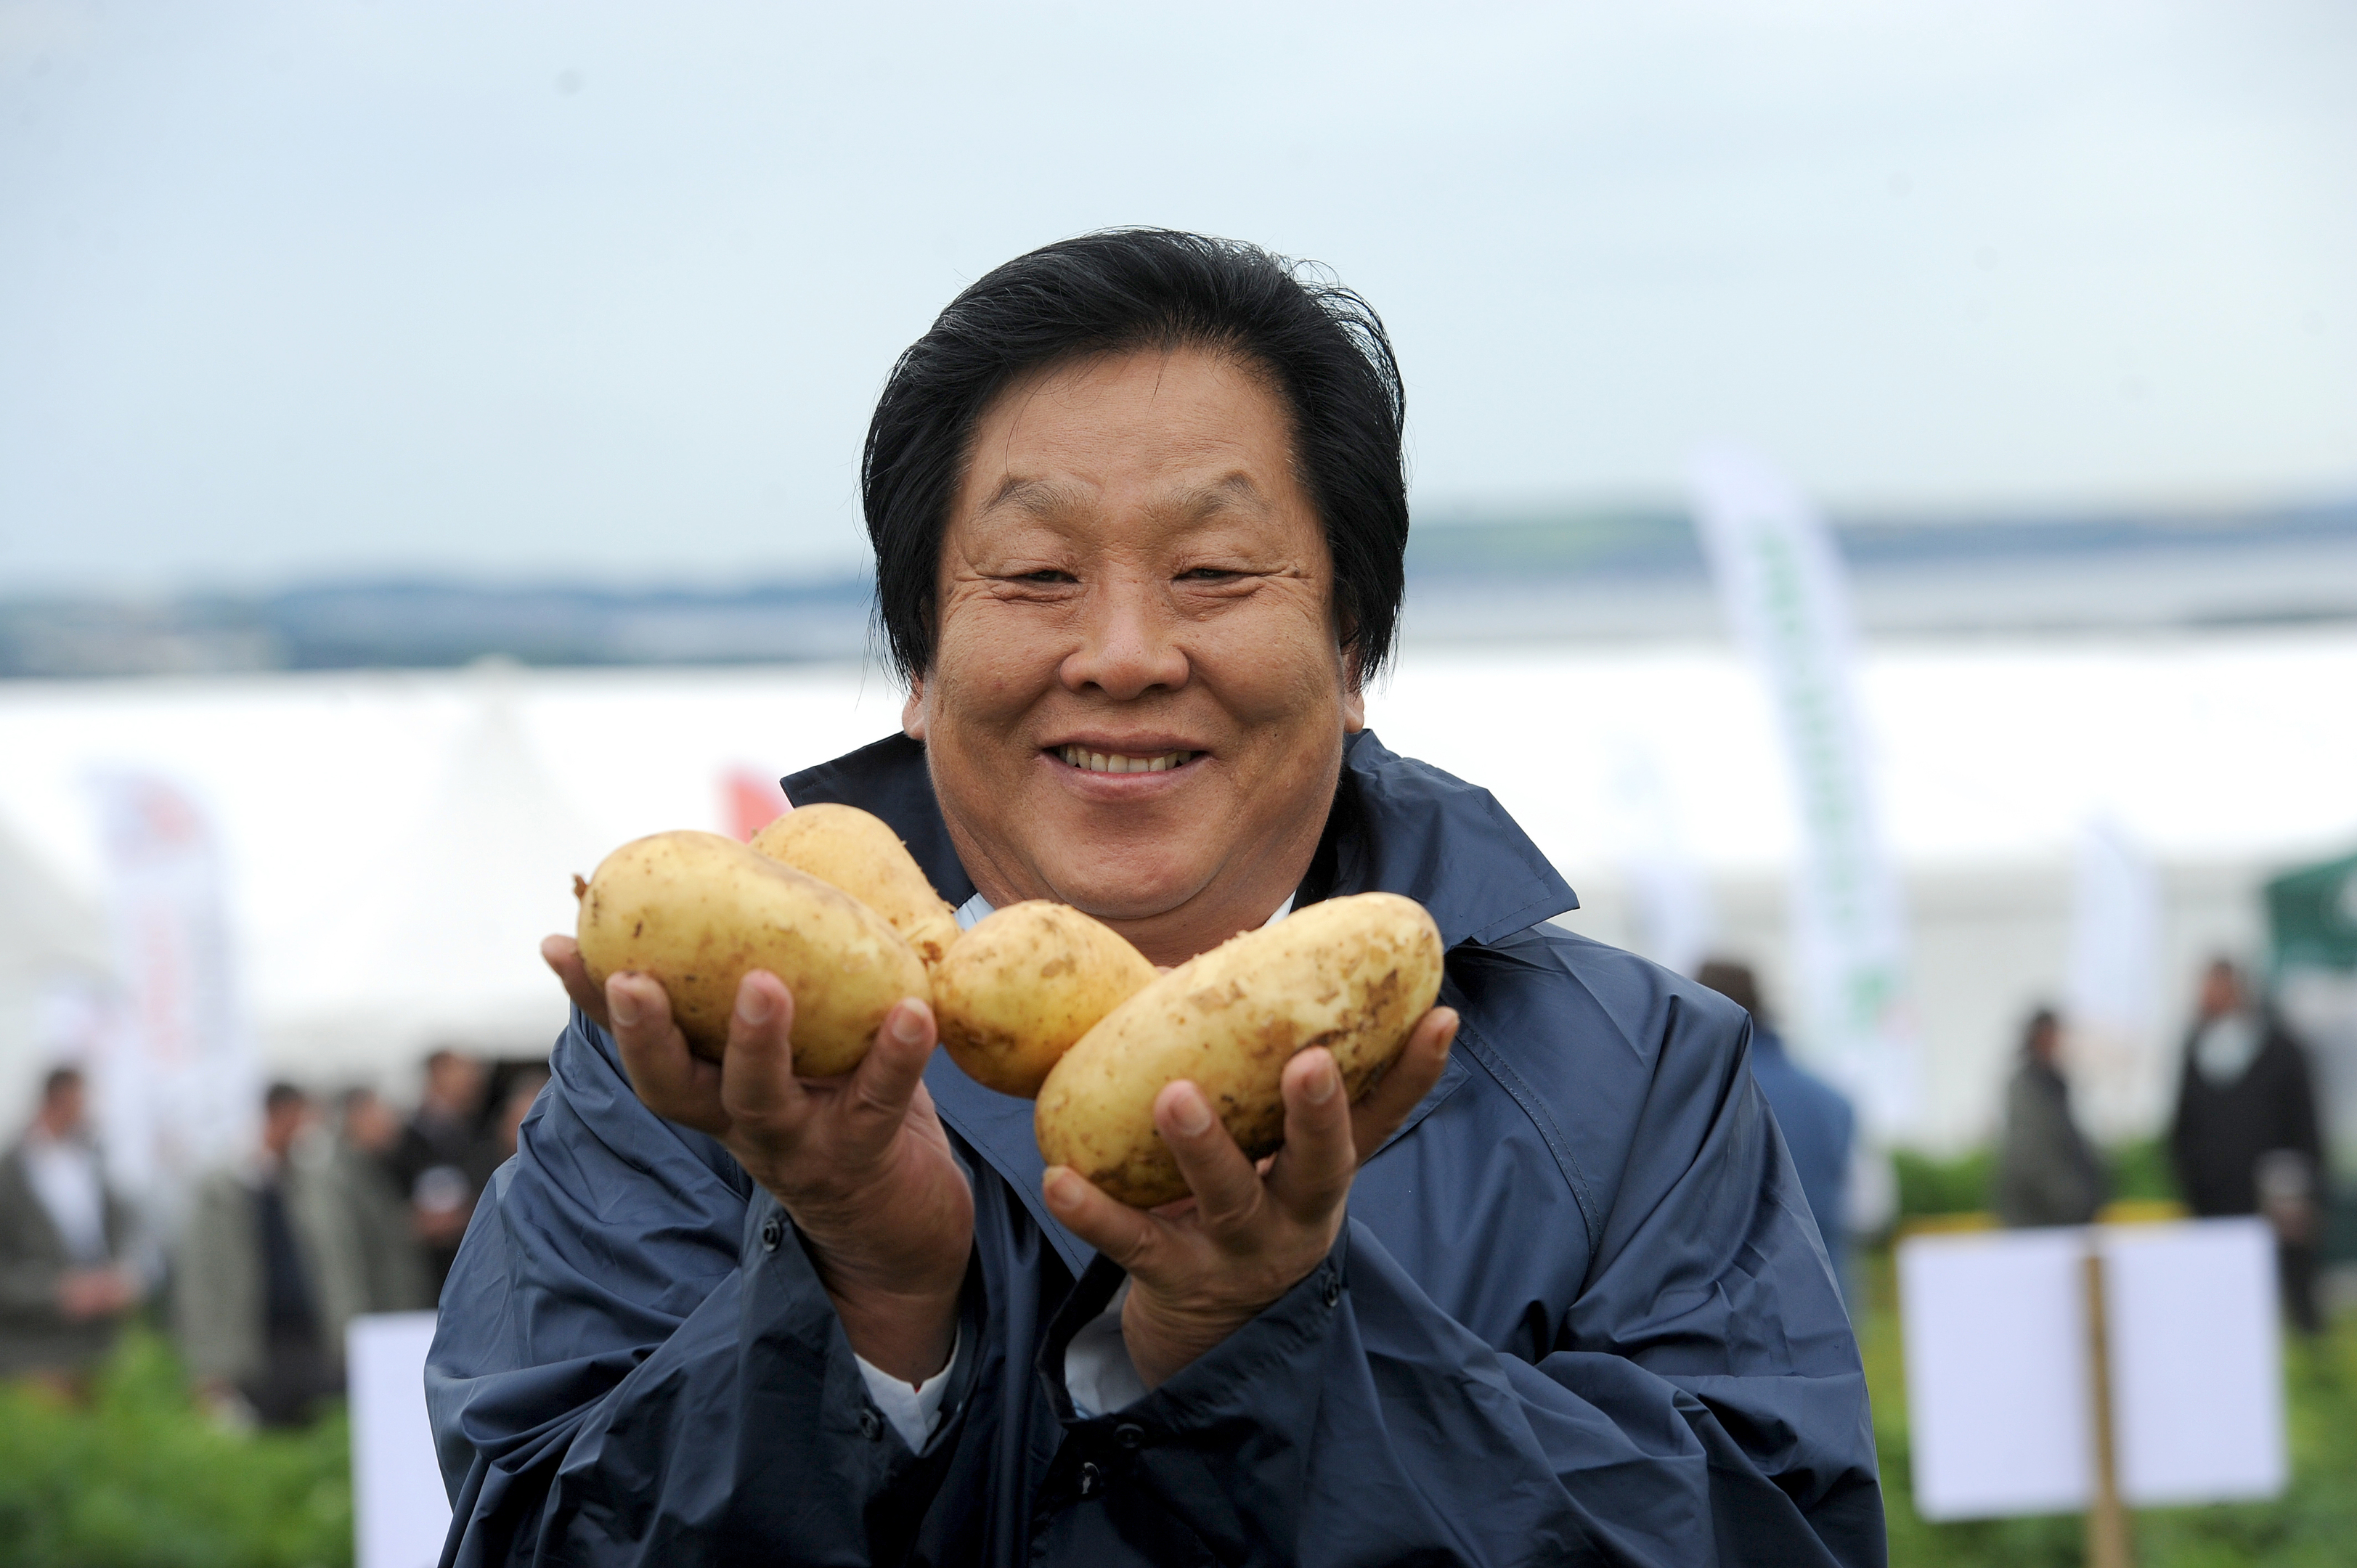 Mr Liang's company grows potatoes on 100,000 hectares in Inner Mongolia